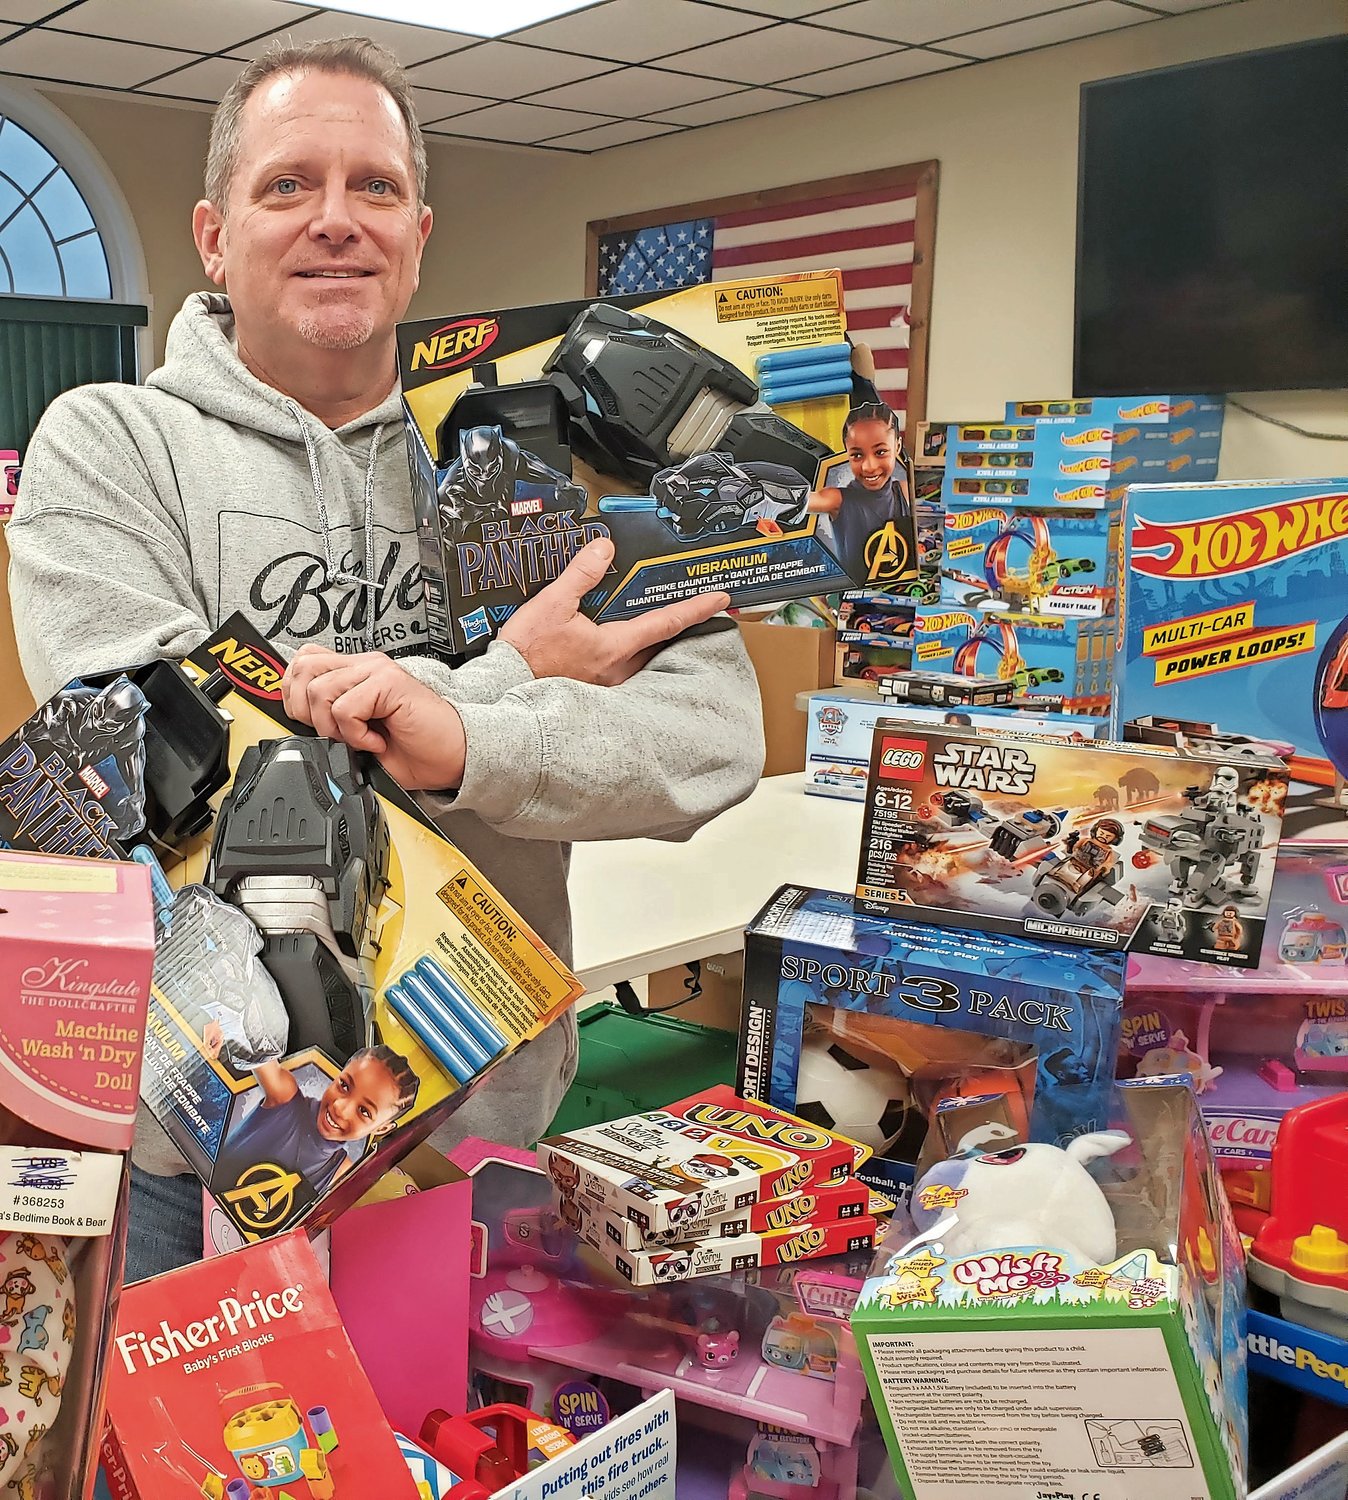 Det. Patrick Franzone donates over $30,000 worth of toys to Freeport children annually.